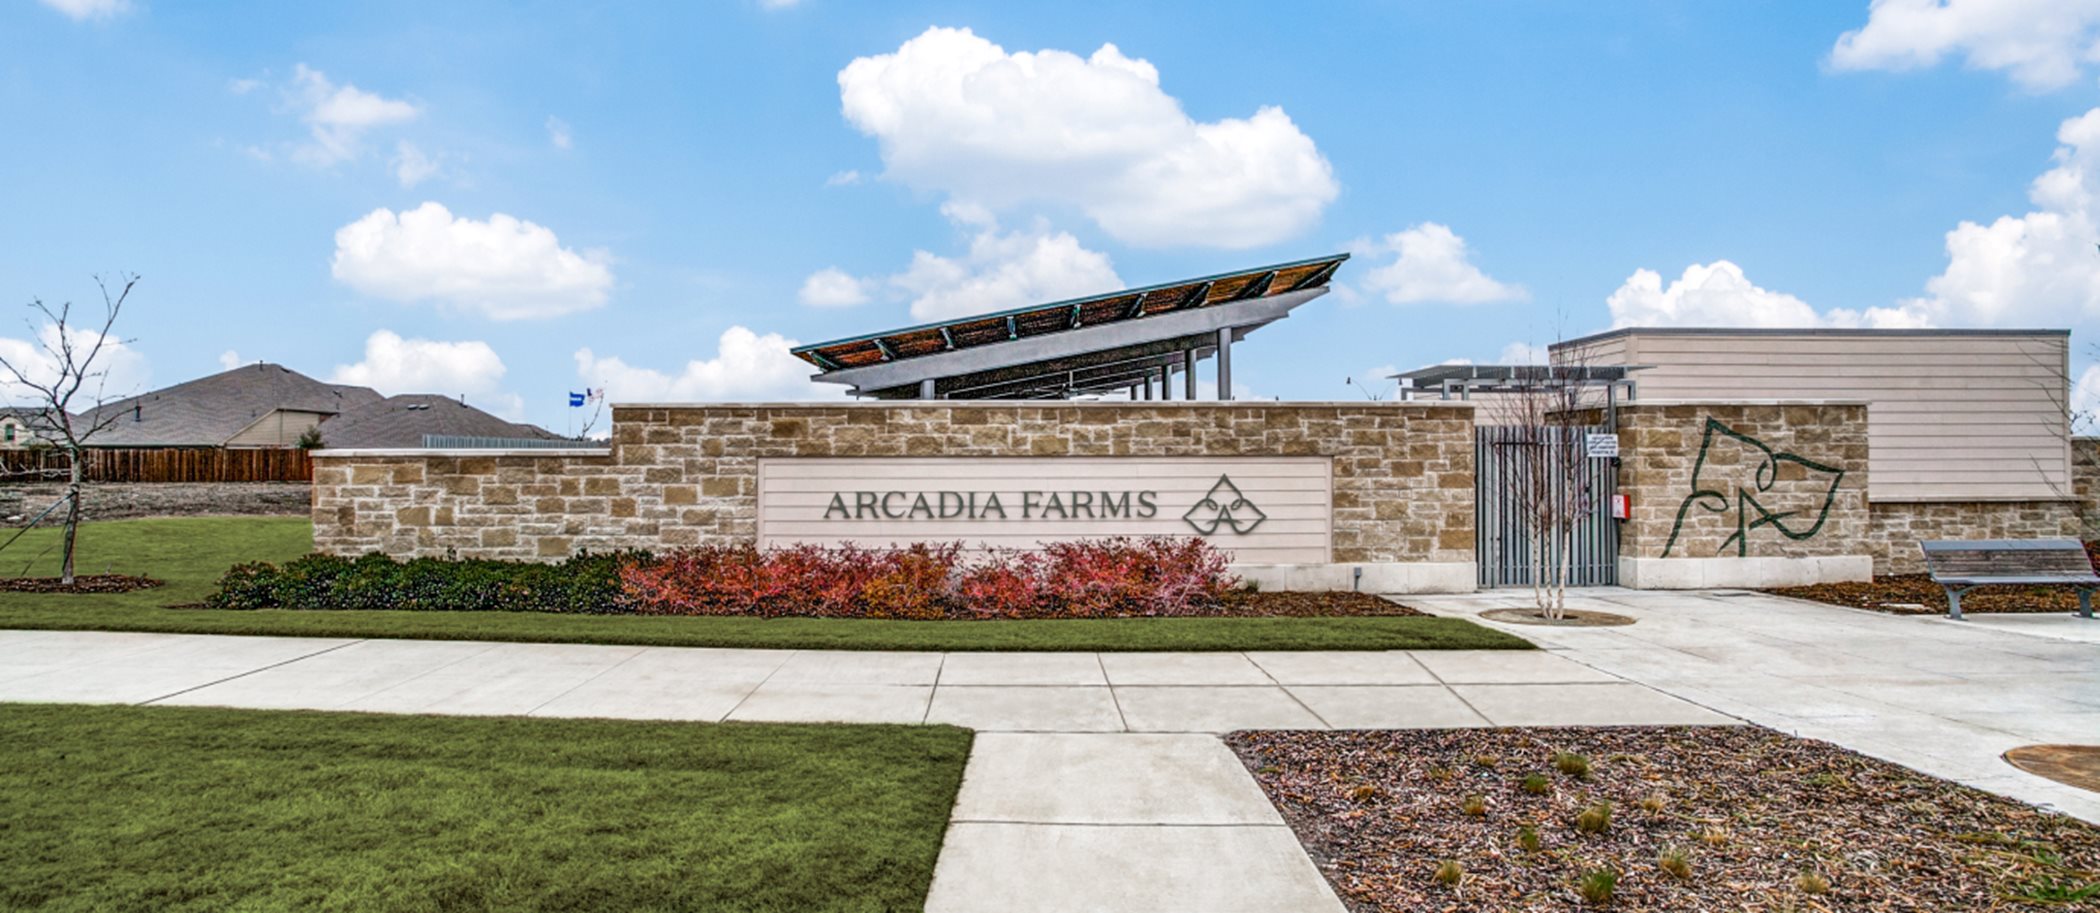 Welcome to Arcadia Farms